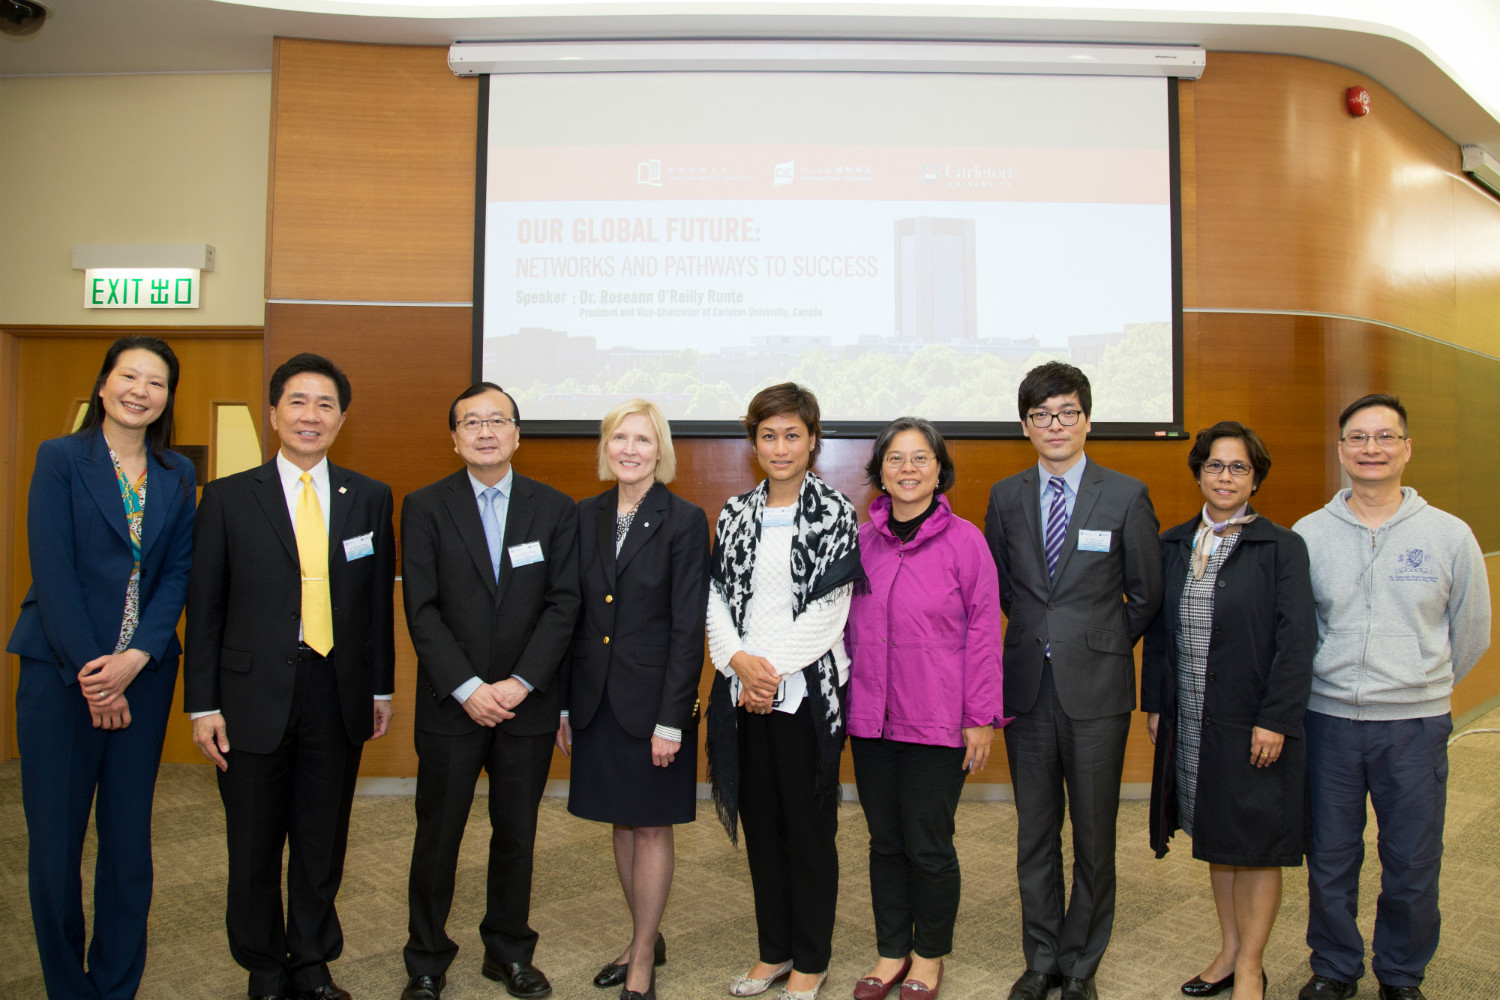 Dr. Richard Fung, Advisor of CIE (2nd from the left), Dr. Simon Wong, Dean of School of Continuing Education, HKBU (3rd from the left) and Dr. Roseann O’Reilly Runte, President of Carleton University (4th from the left) took a group photo with staff representatives.